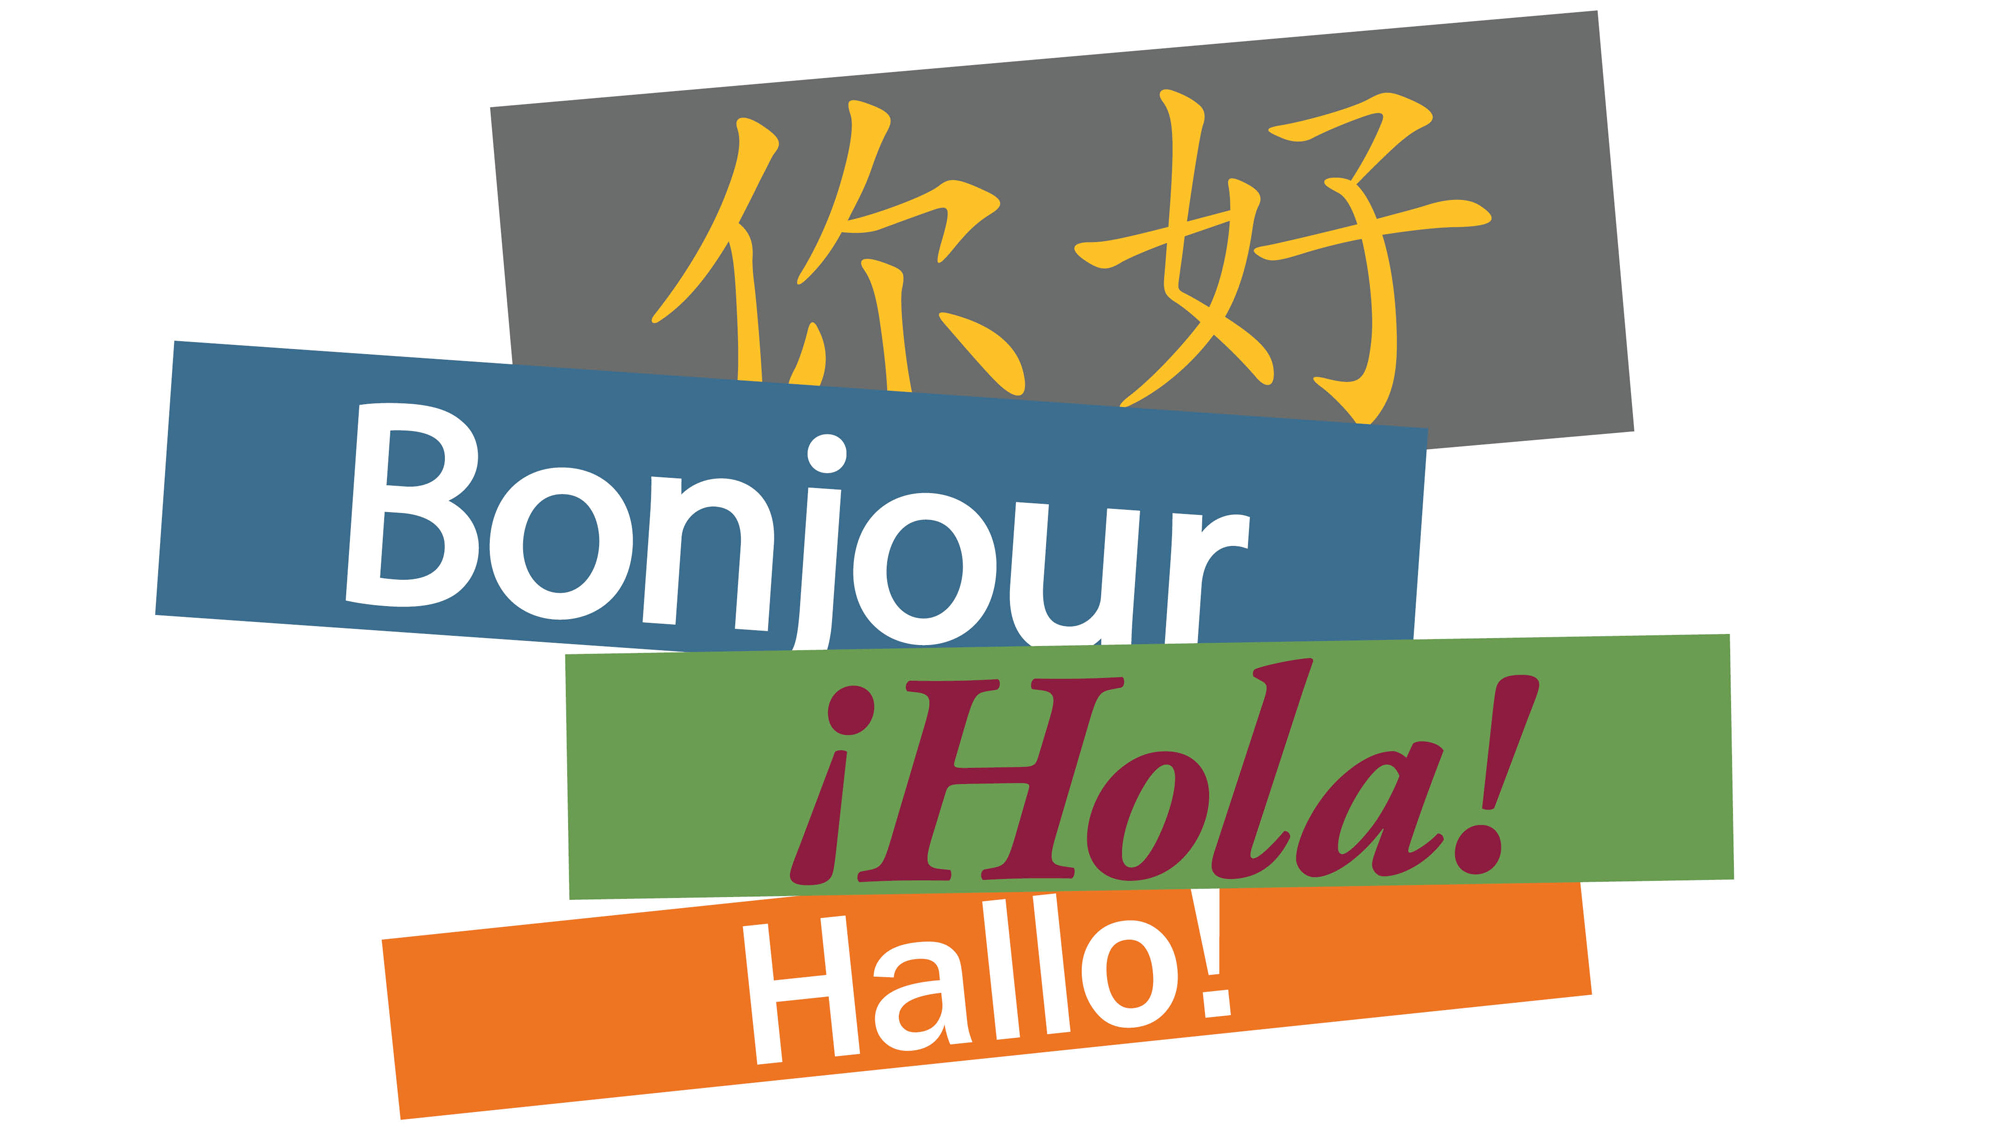 text saying "Hello" in four different languages